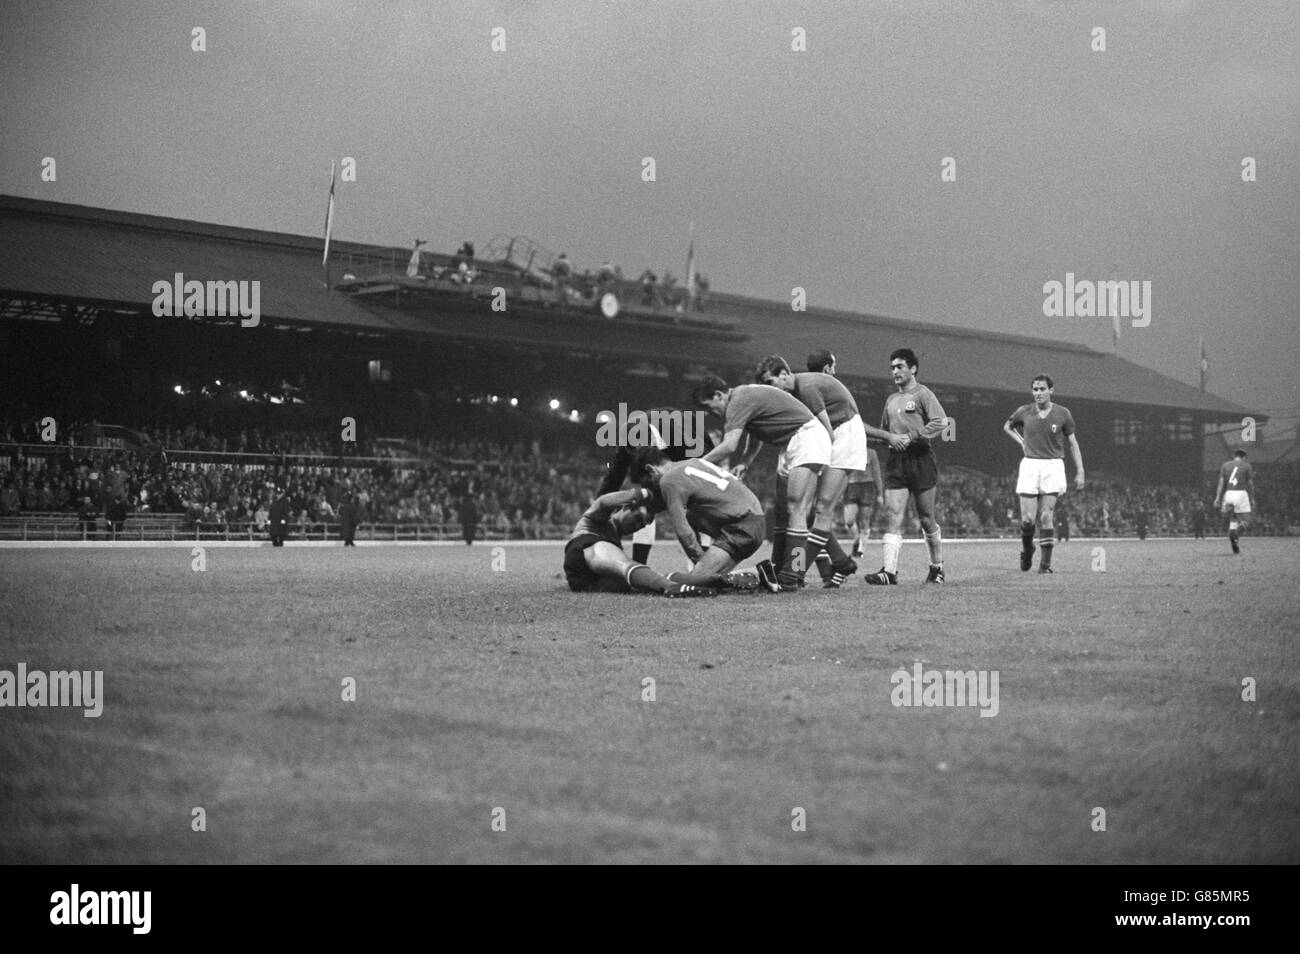 The group 1966 Black and White Stock Photos & Images - Alamy